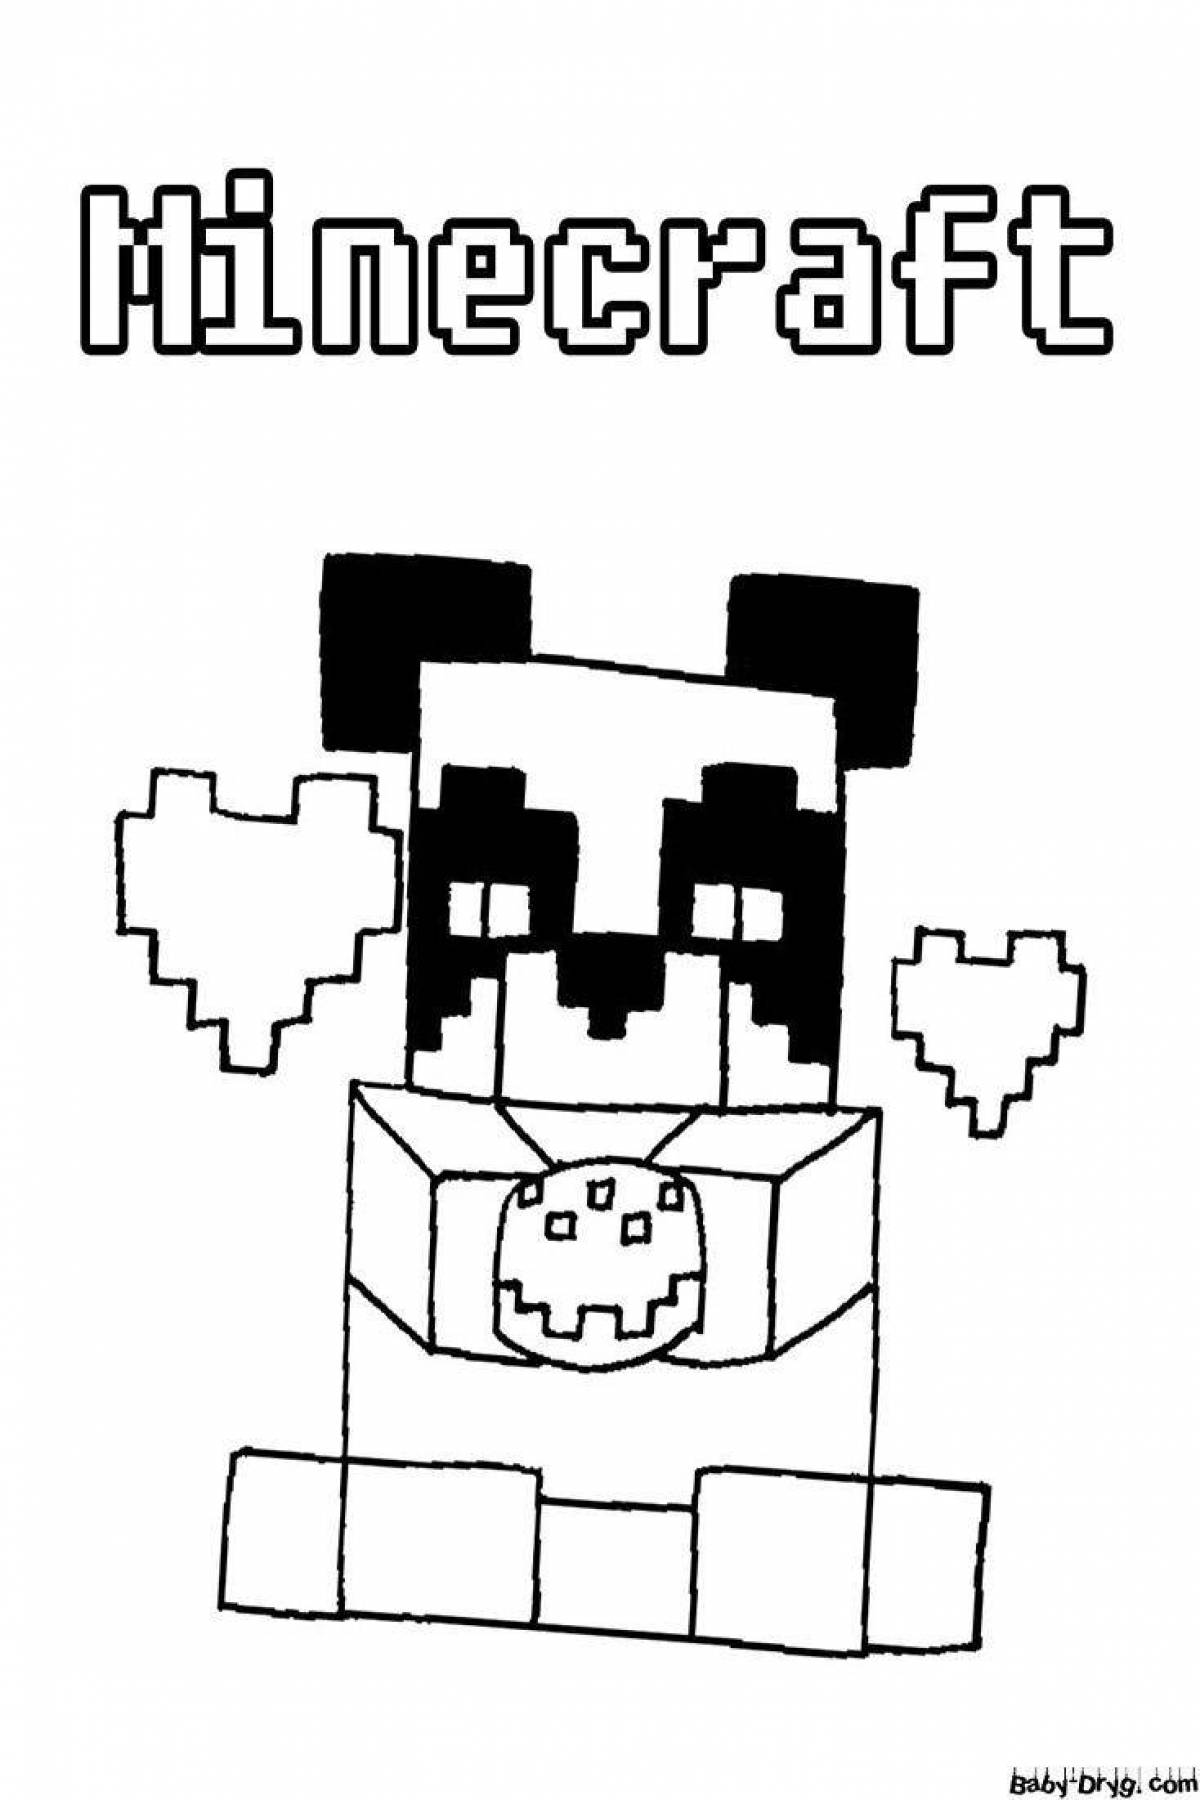 Fascinating minecraft icon coloring page